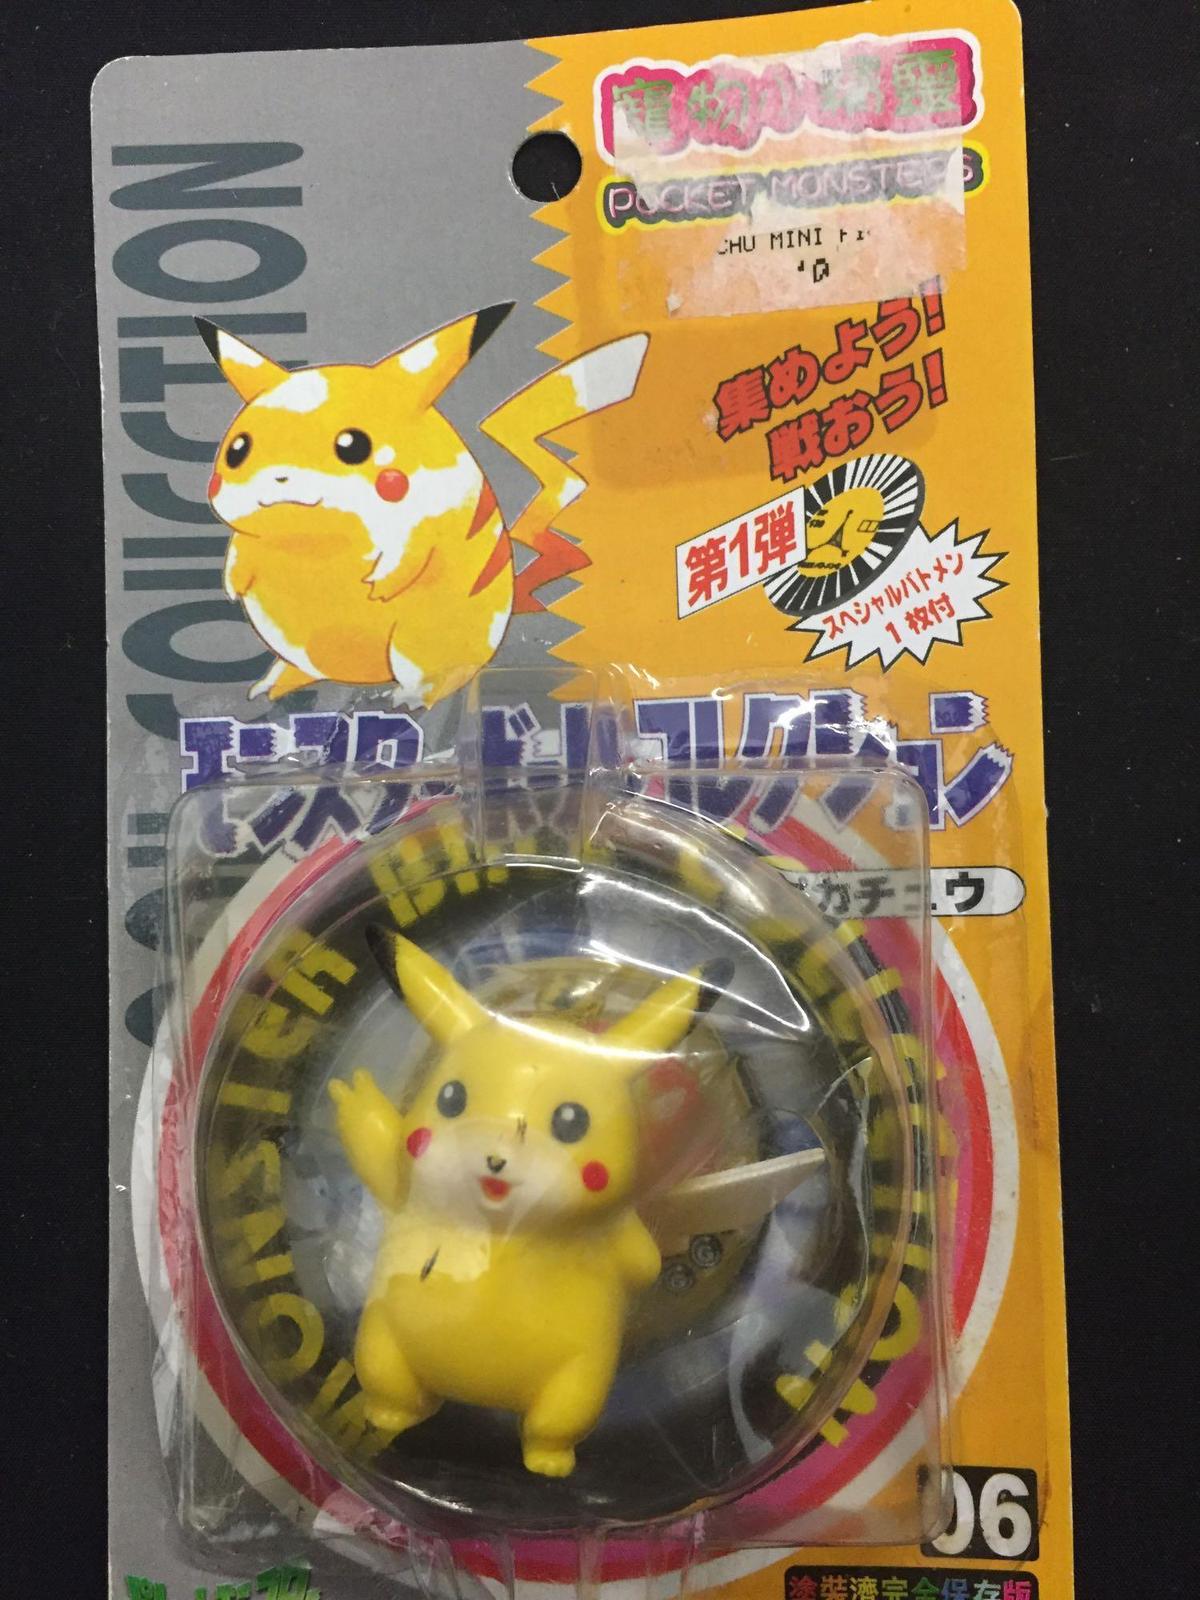 Vintage Japanese Pocket Monsters POKEMON Toy PIKACHU New in Package